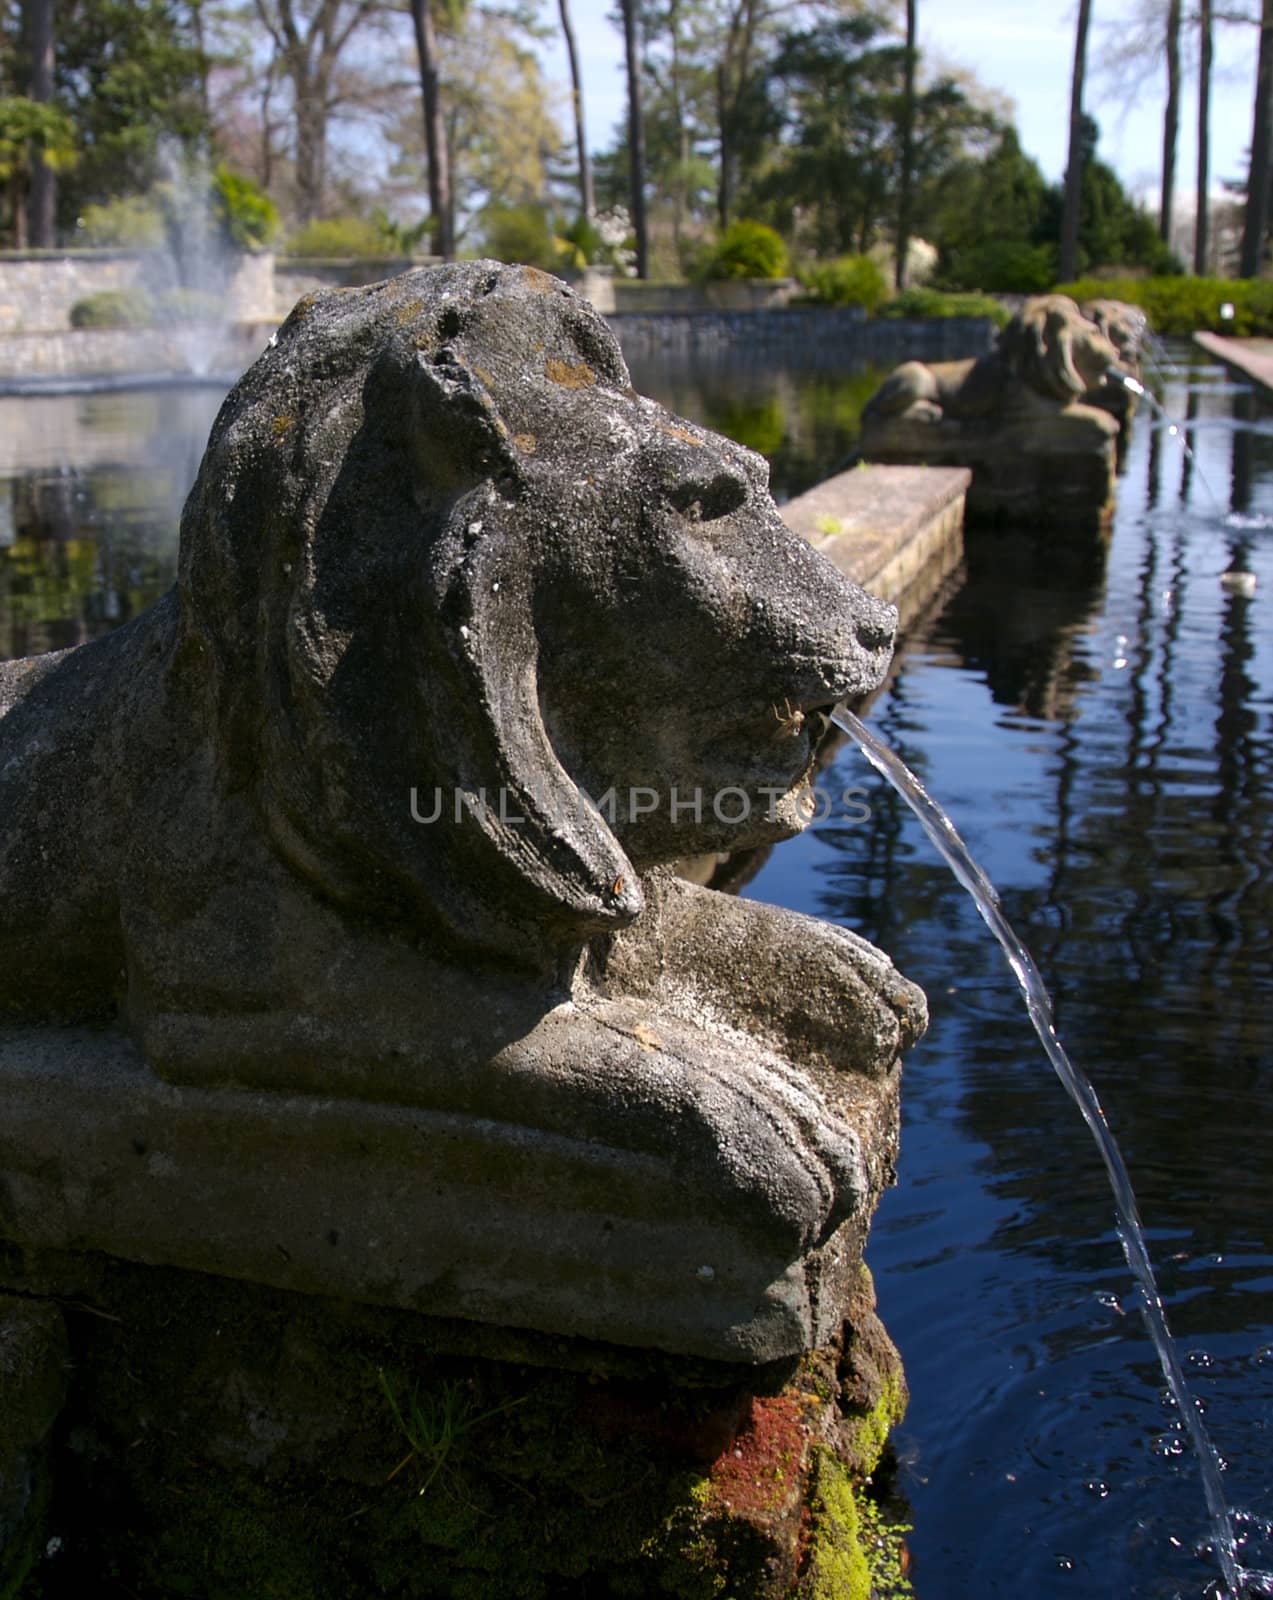 A line of stone lion fountains in a beautiful garden on a warm spring day